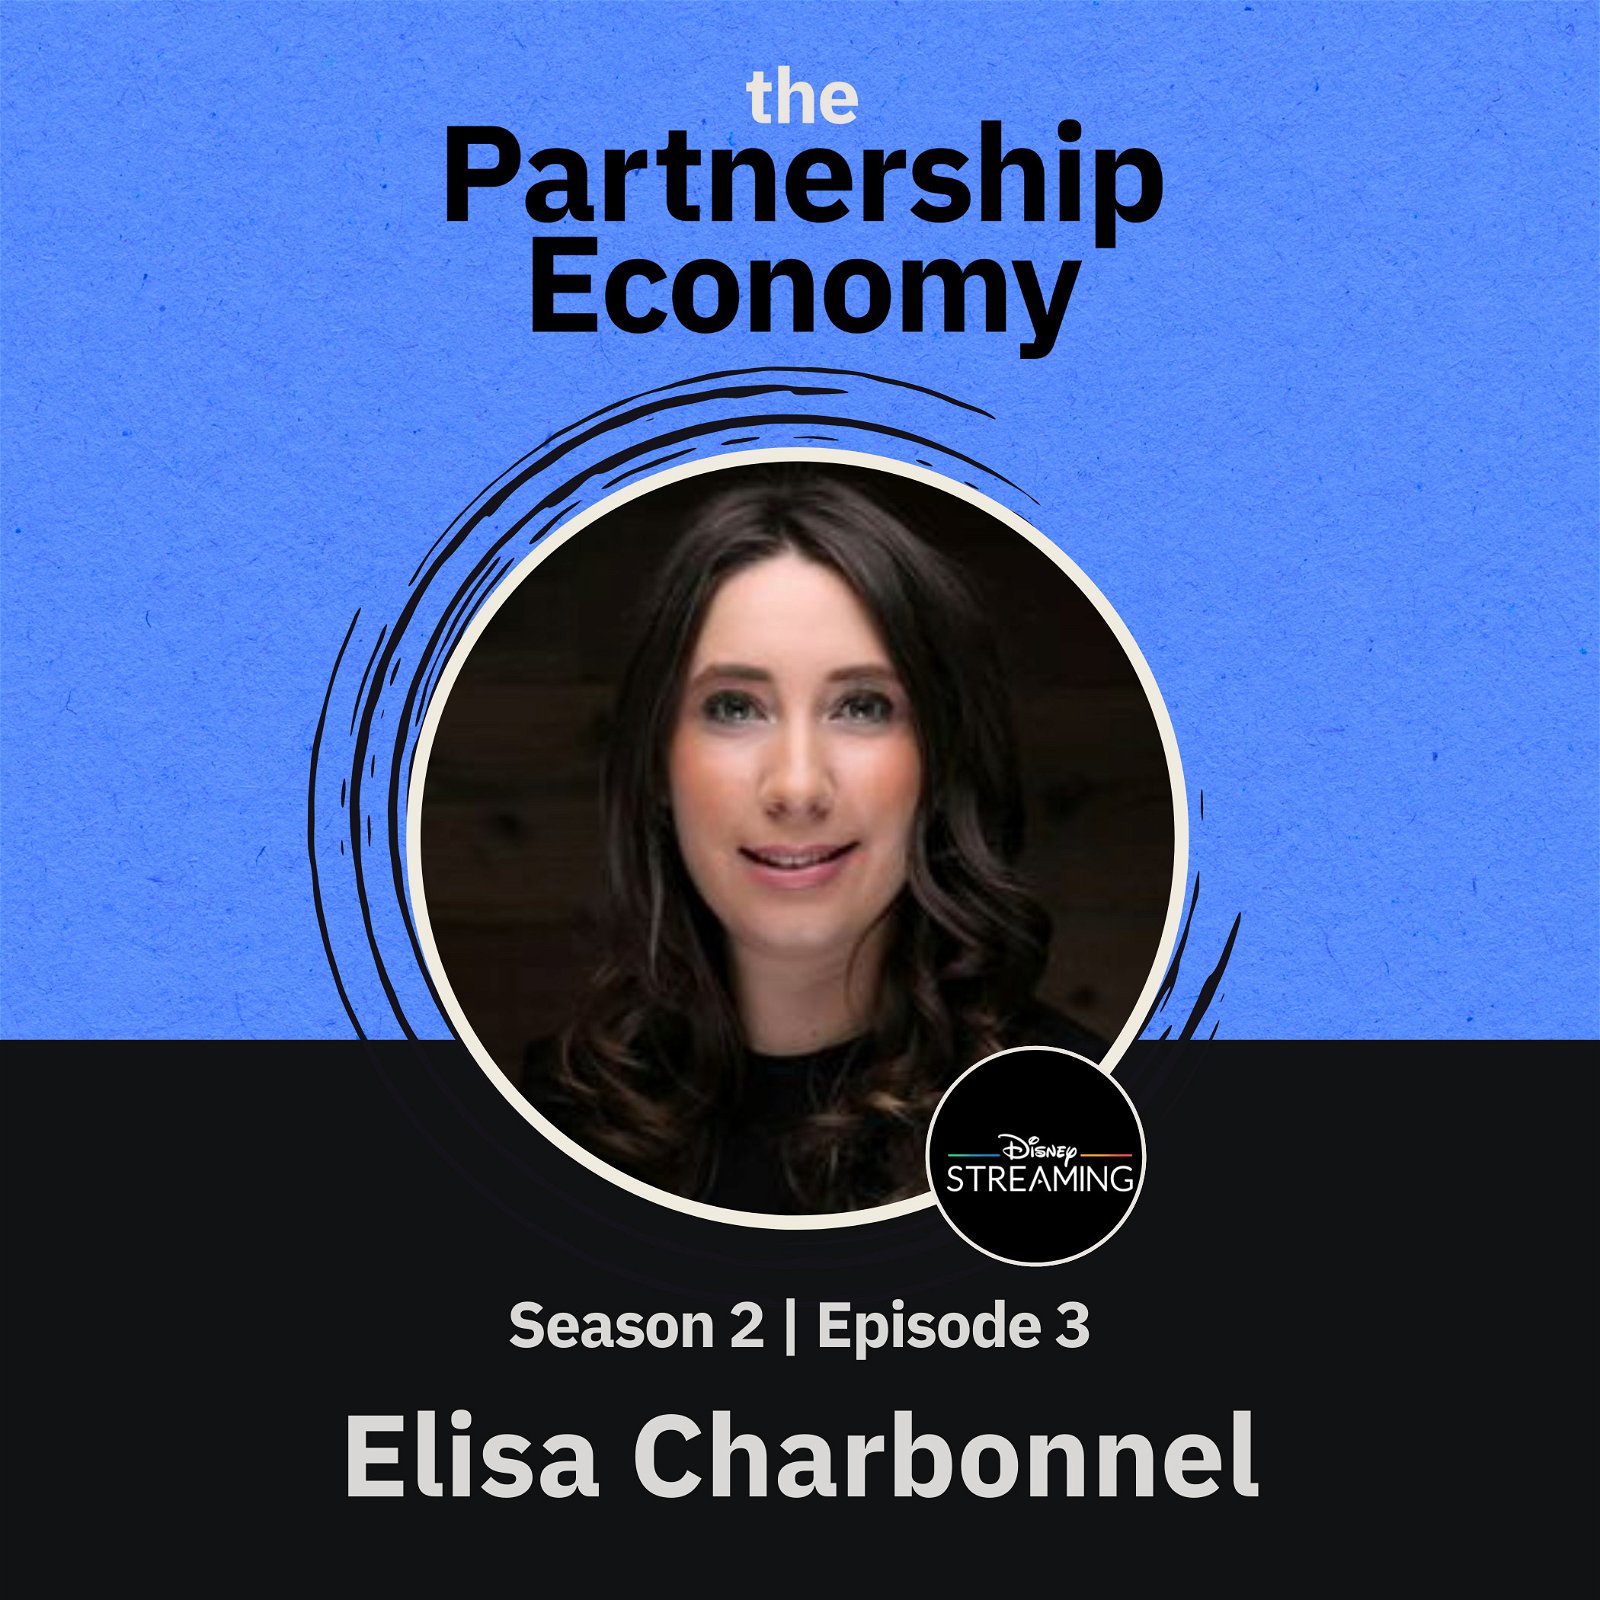 Episode cover art for Elisa Charbonnel, Director of Paid Media at Disney Streaming, on how to pivot partnerships in turbulent times